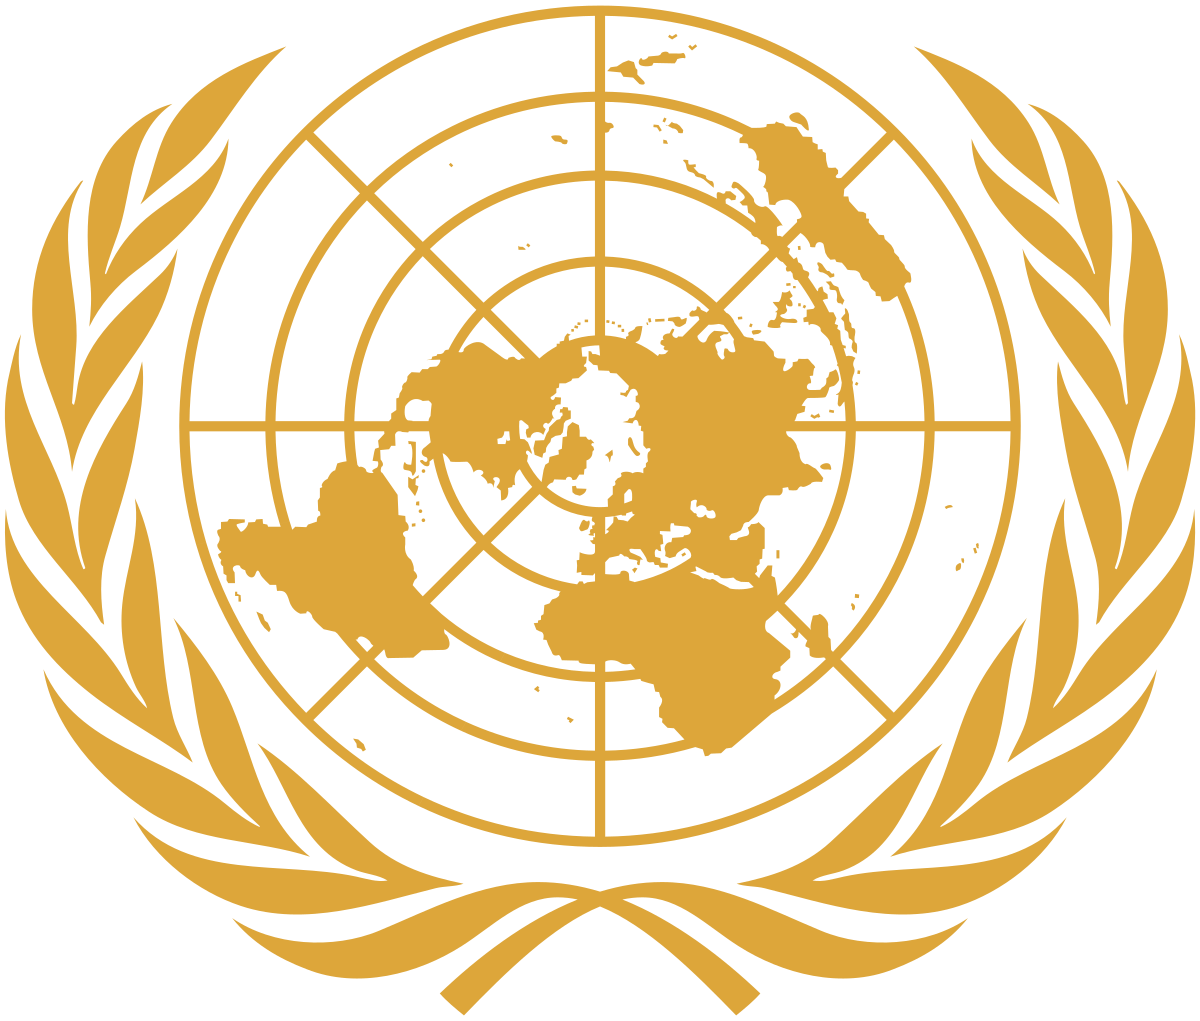 United Nations Security Council Logo - United Nations Security Council